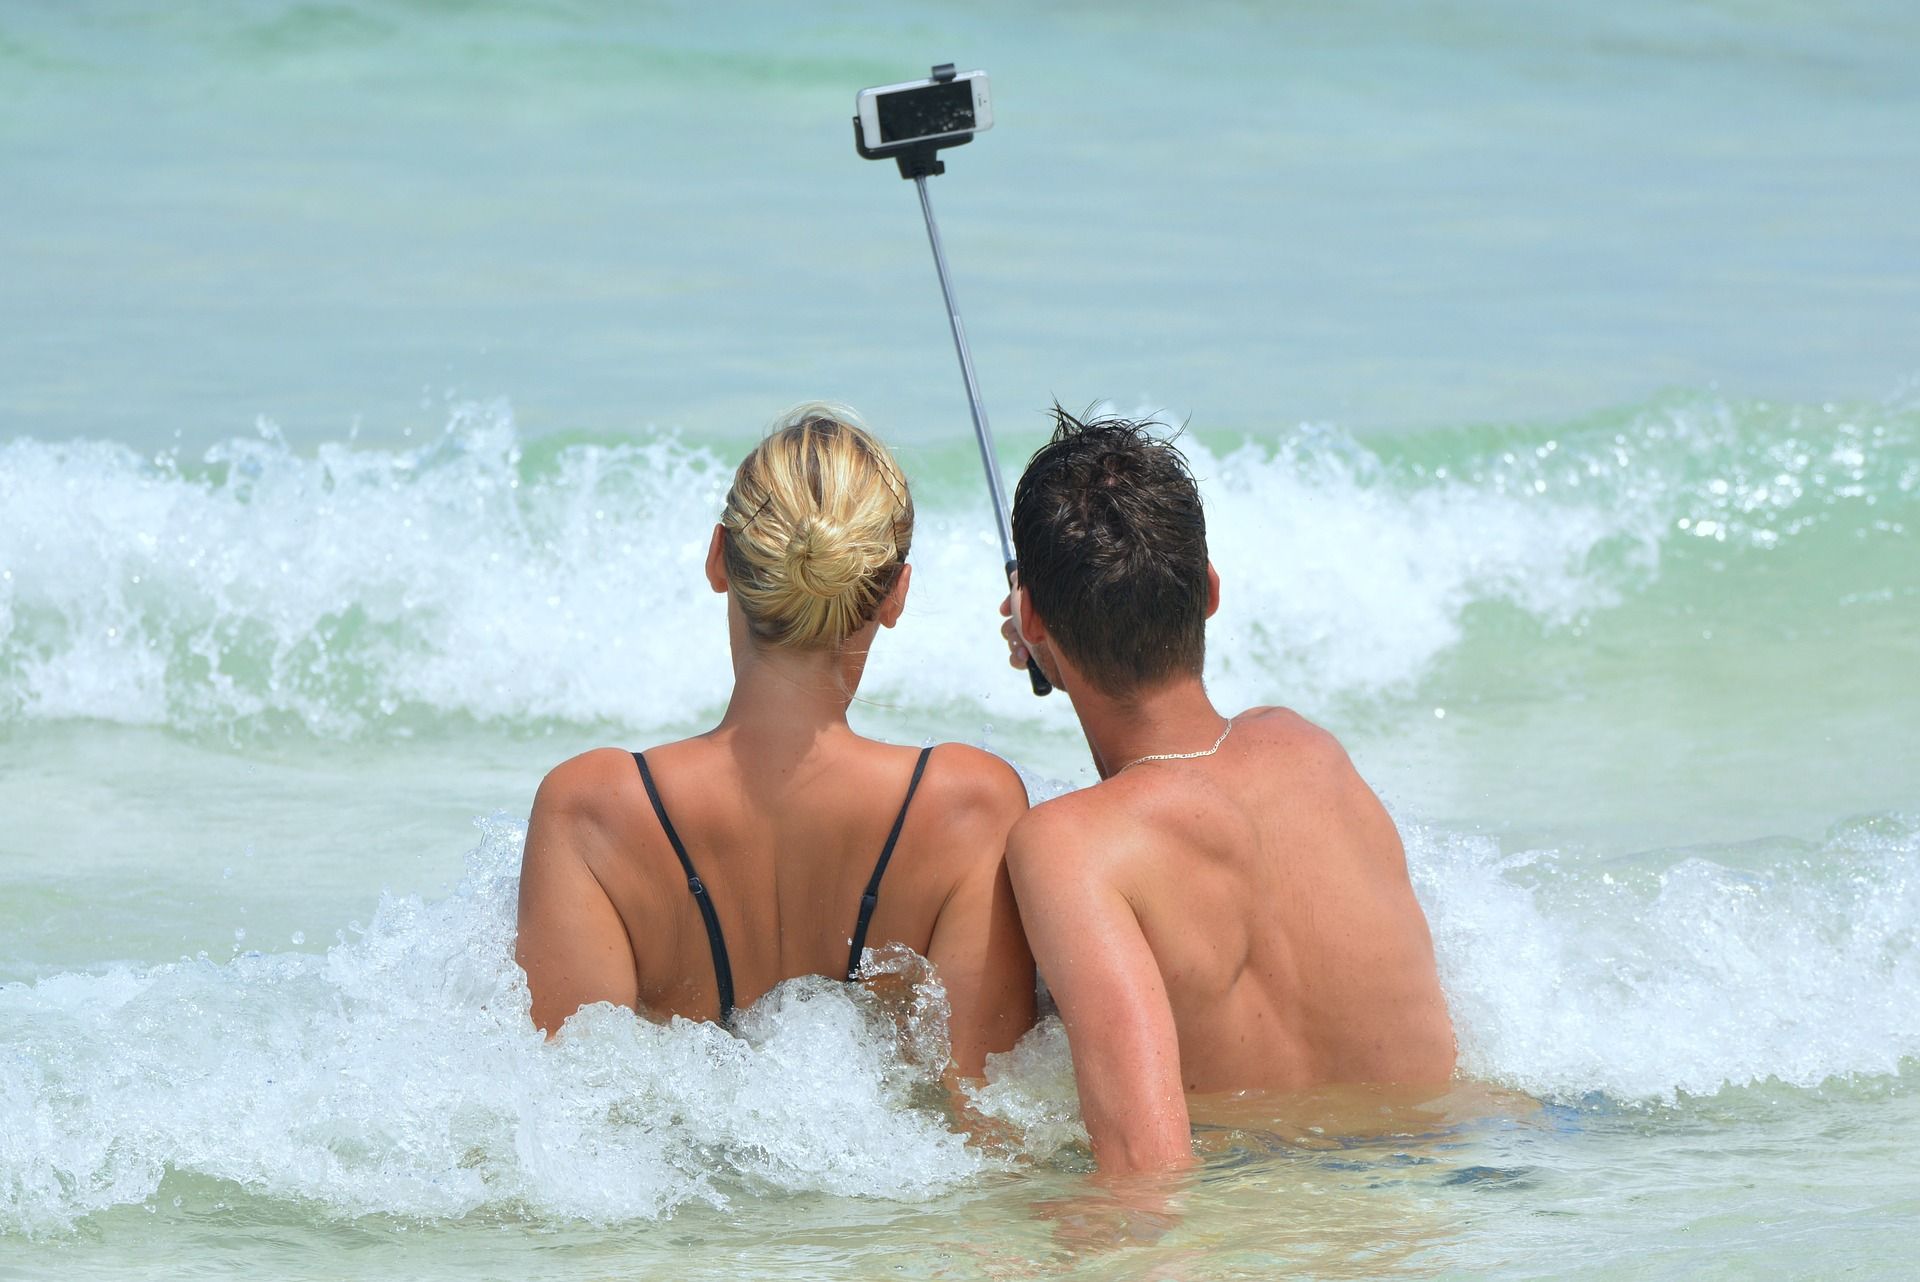 Danish youngsters increasingly sending each other nude photos